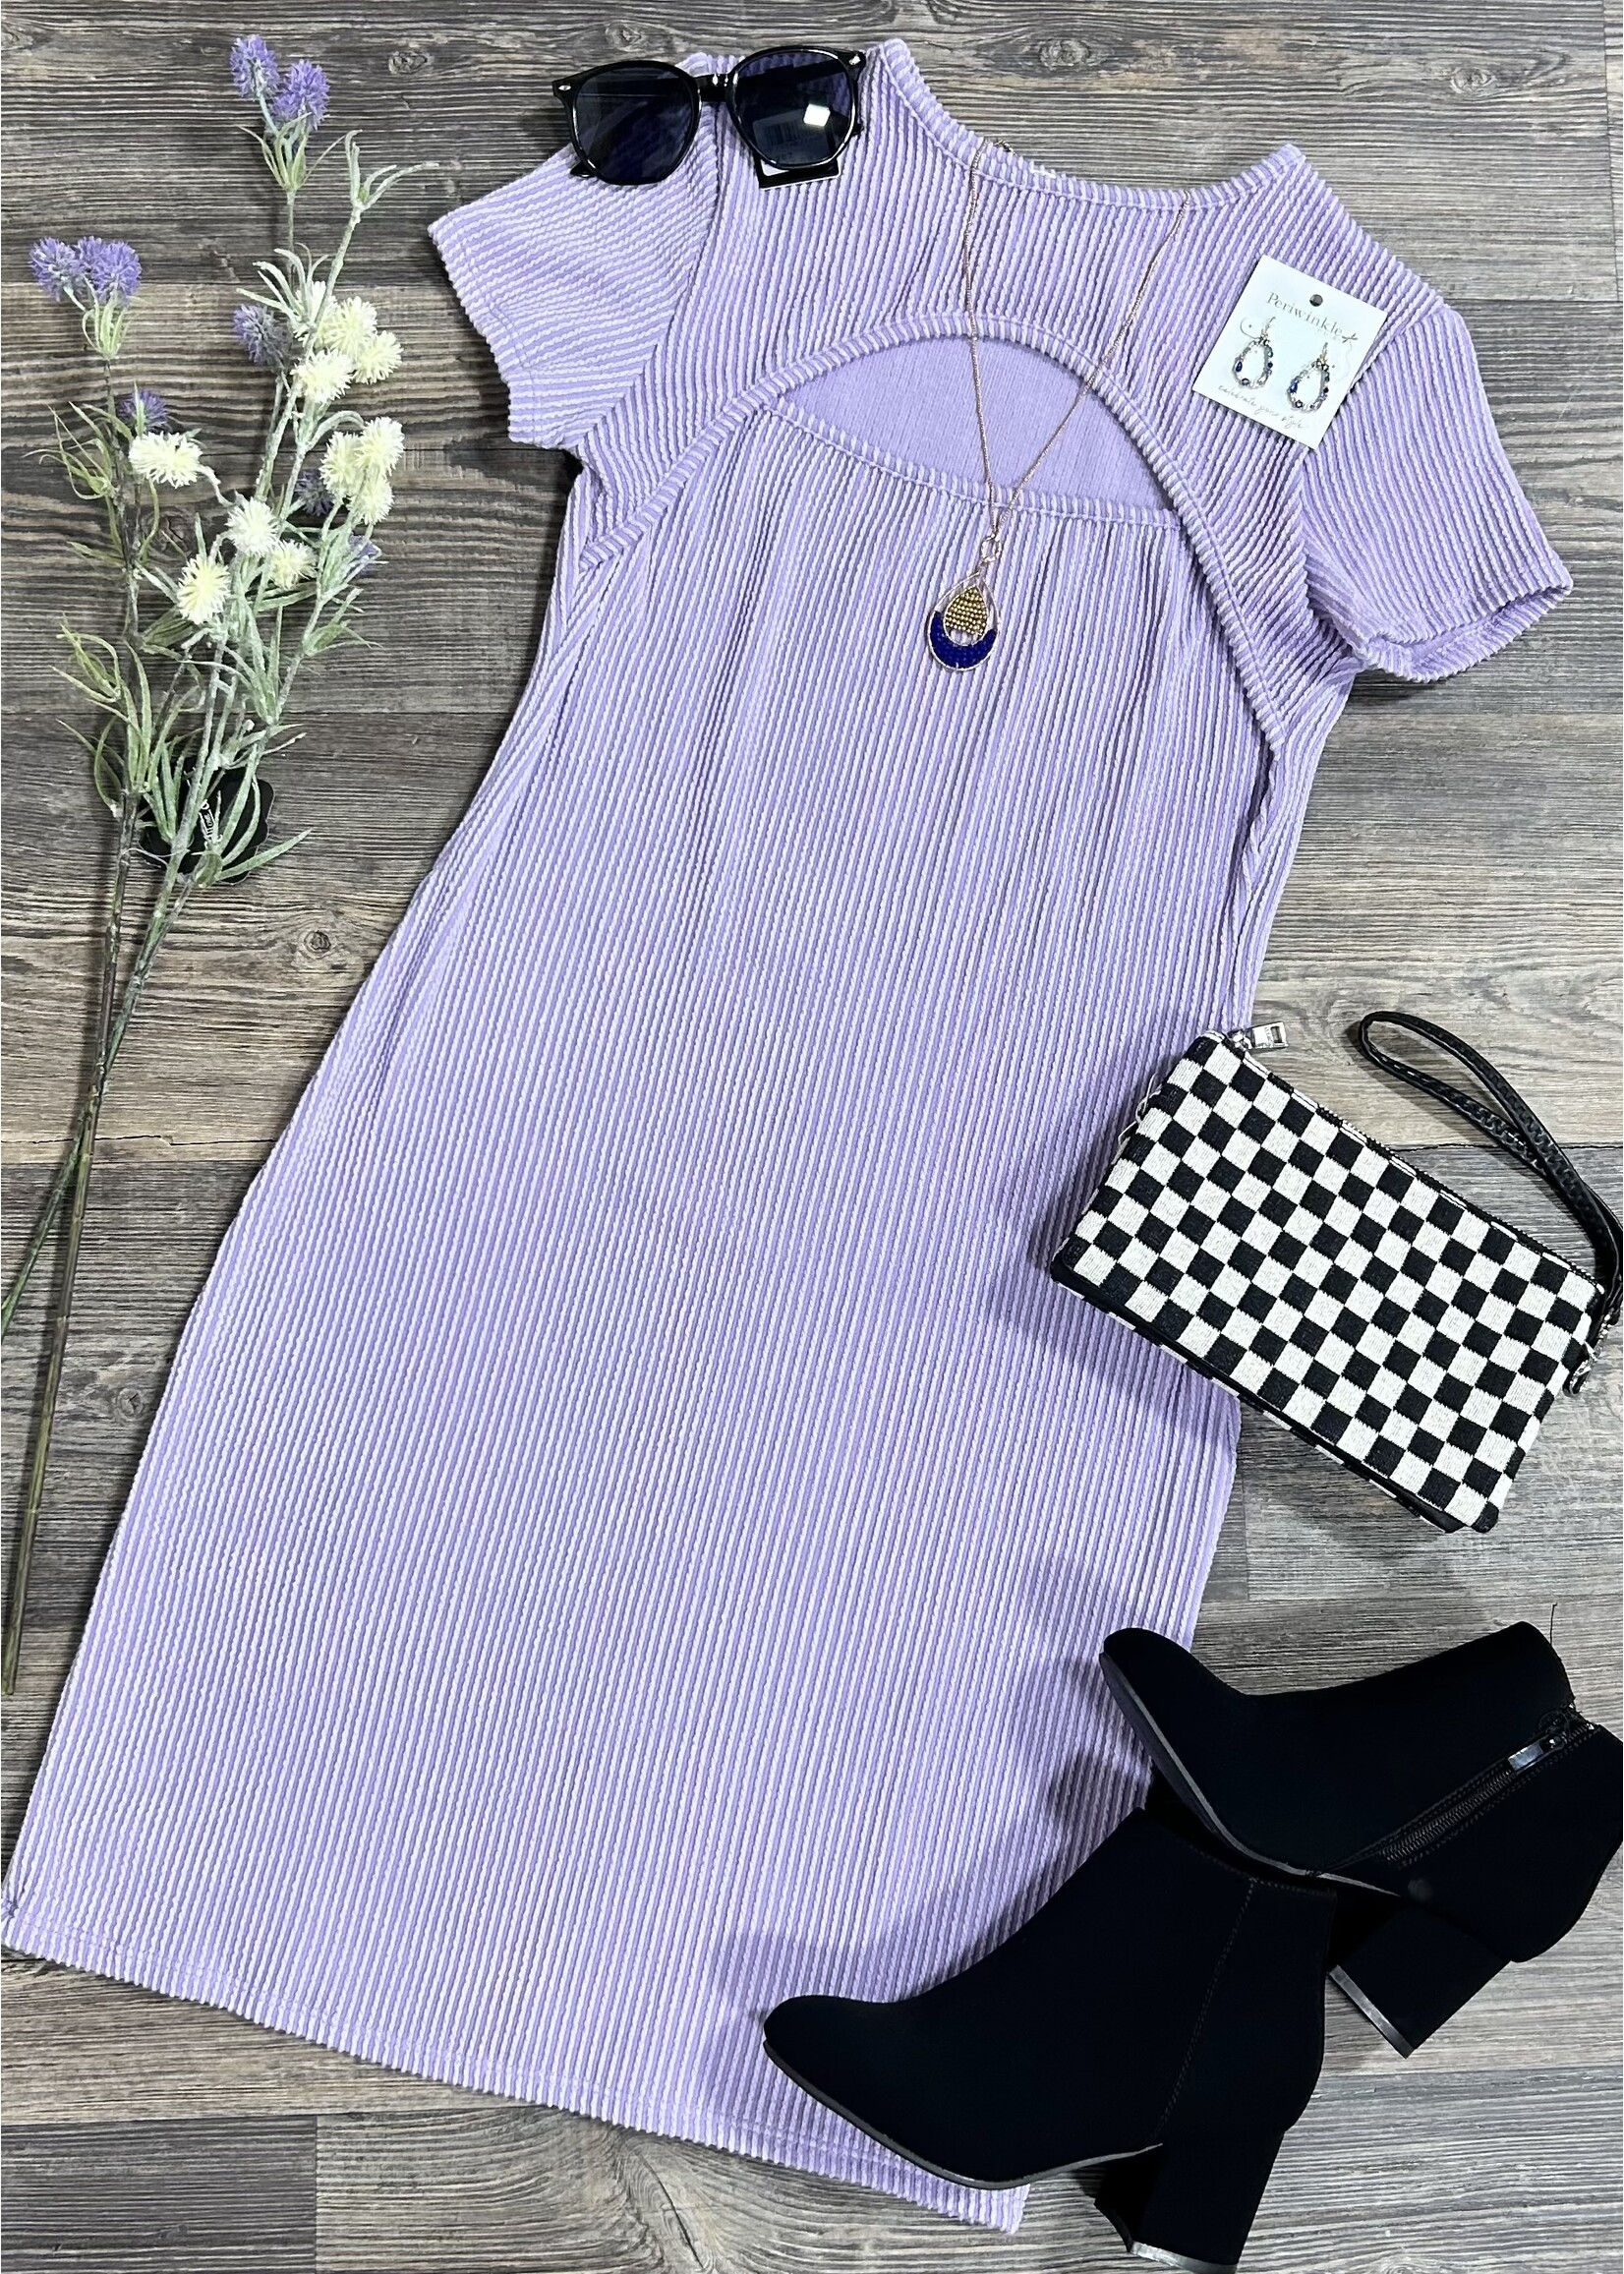 Simply Stunning Dress in Lilac